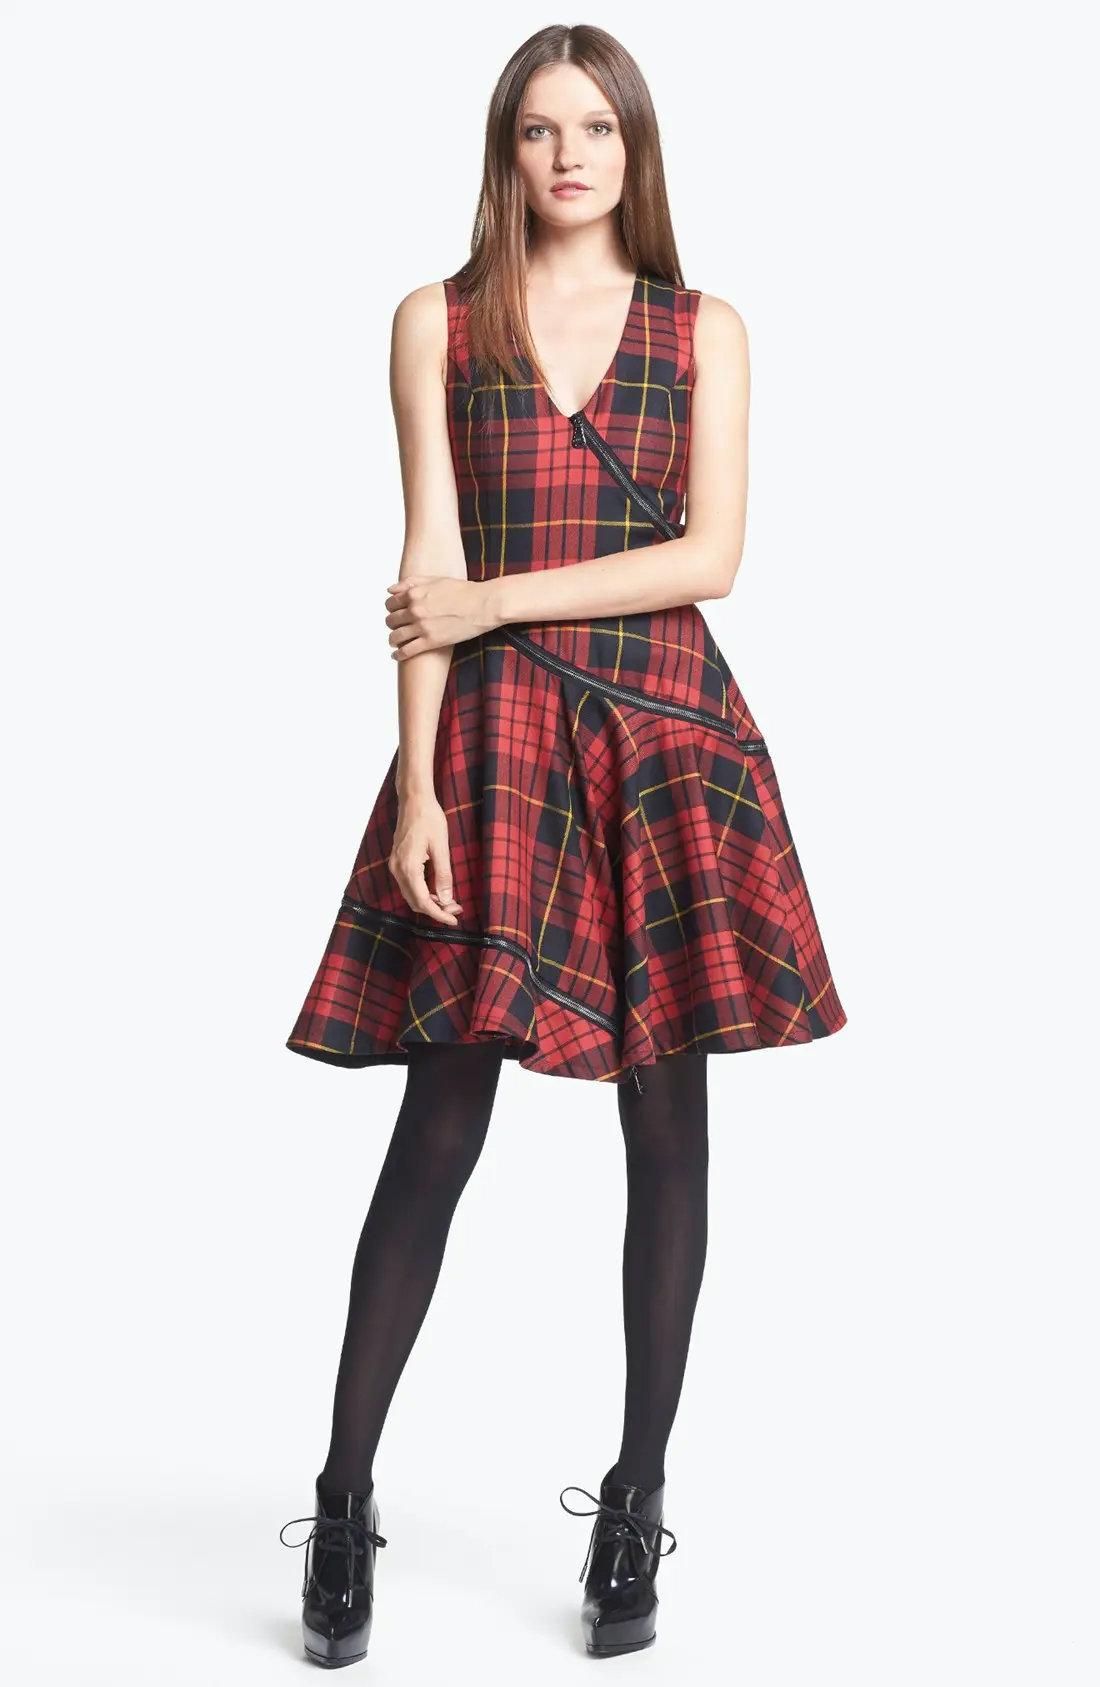 Alexander McQueen MCQ Red Tartan Wool Dress.
Classic tartan check, the zipper moves in a circle from the bodice to the hem. 
V-neck, sleeveless.
Concealed zipper at the back.
Size: US - 4, IT 40
Made in Portugal 
Excellent condition
